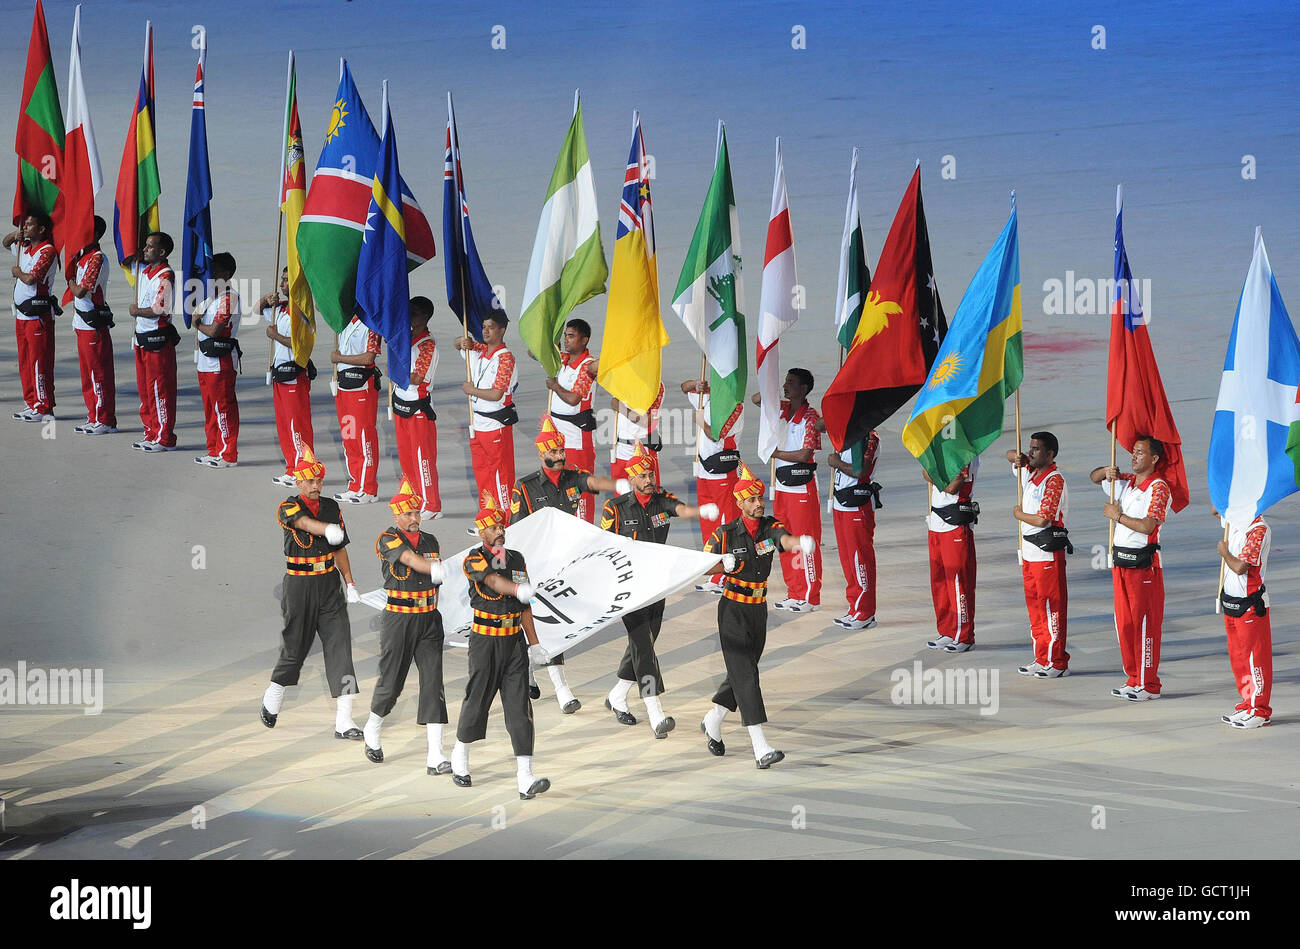 The Commonwealth flag is brought into the stadium during the 2010 Commonwealth Games opening ceremony at the Jawaharlal Nehru Stadium in New Delhi, India. Stock Photo